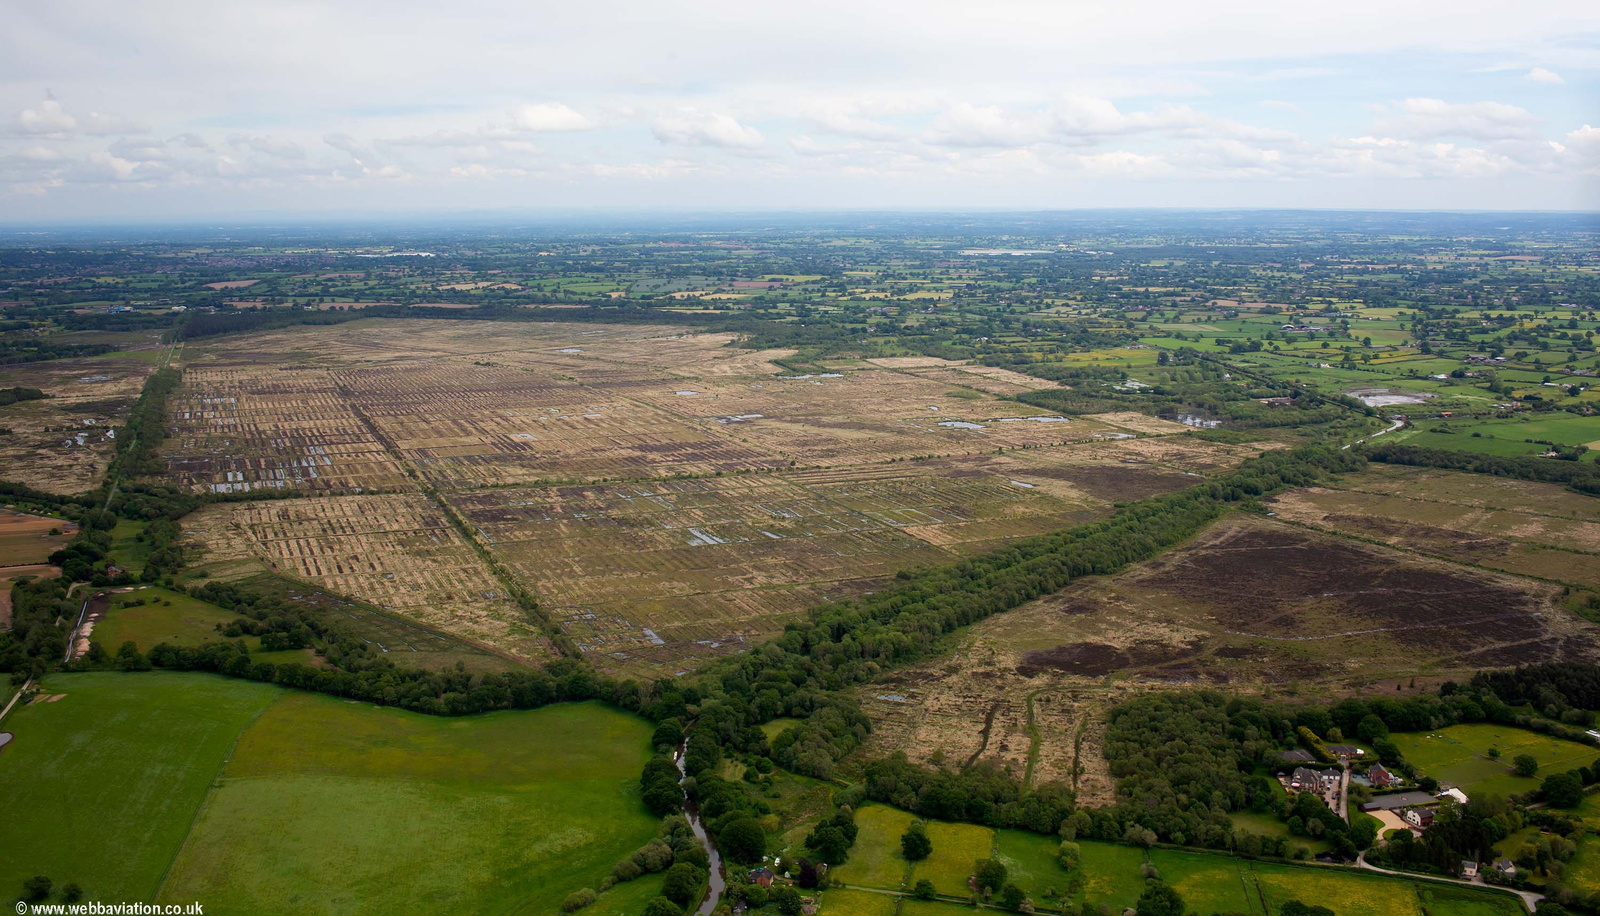 Fenn's, Whixall and Bettisfield Mosses National Nature Reserve from the air